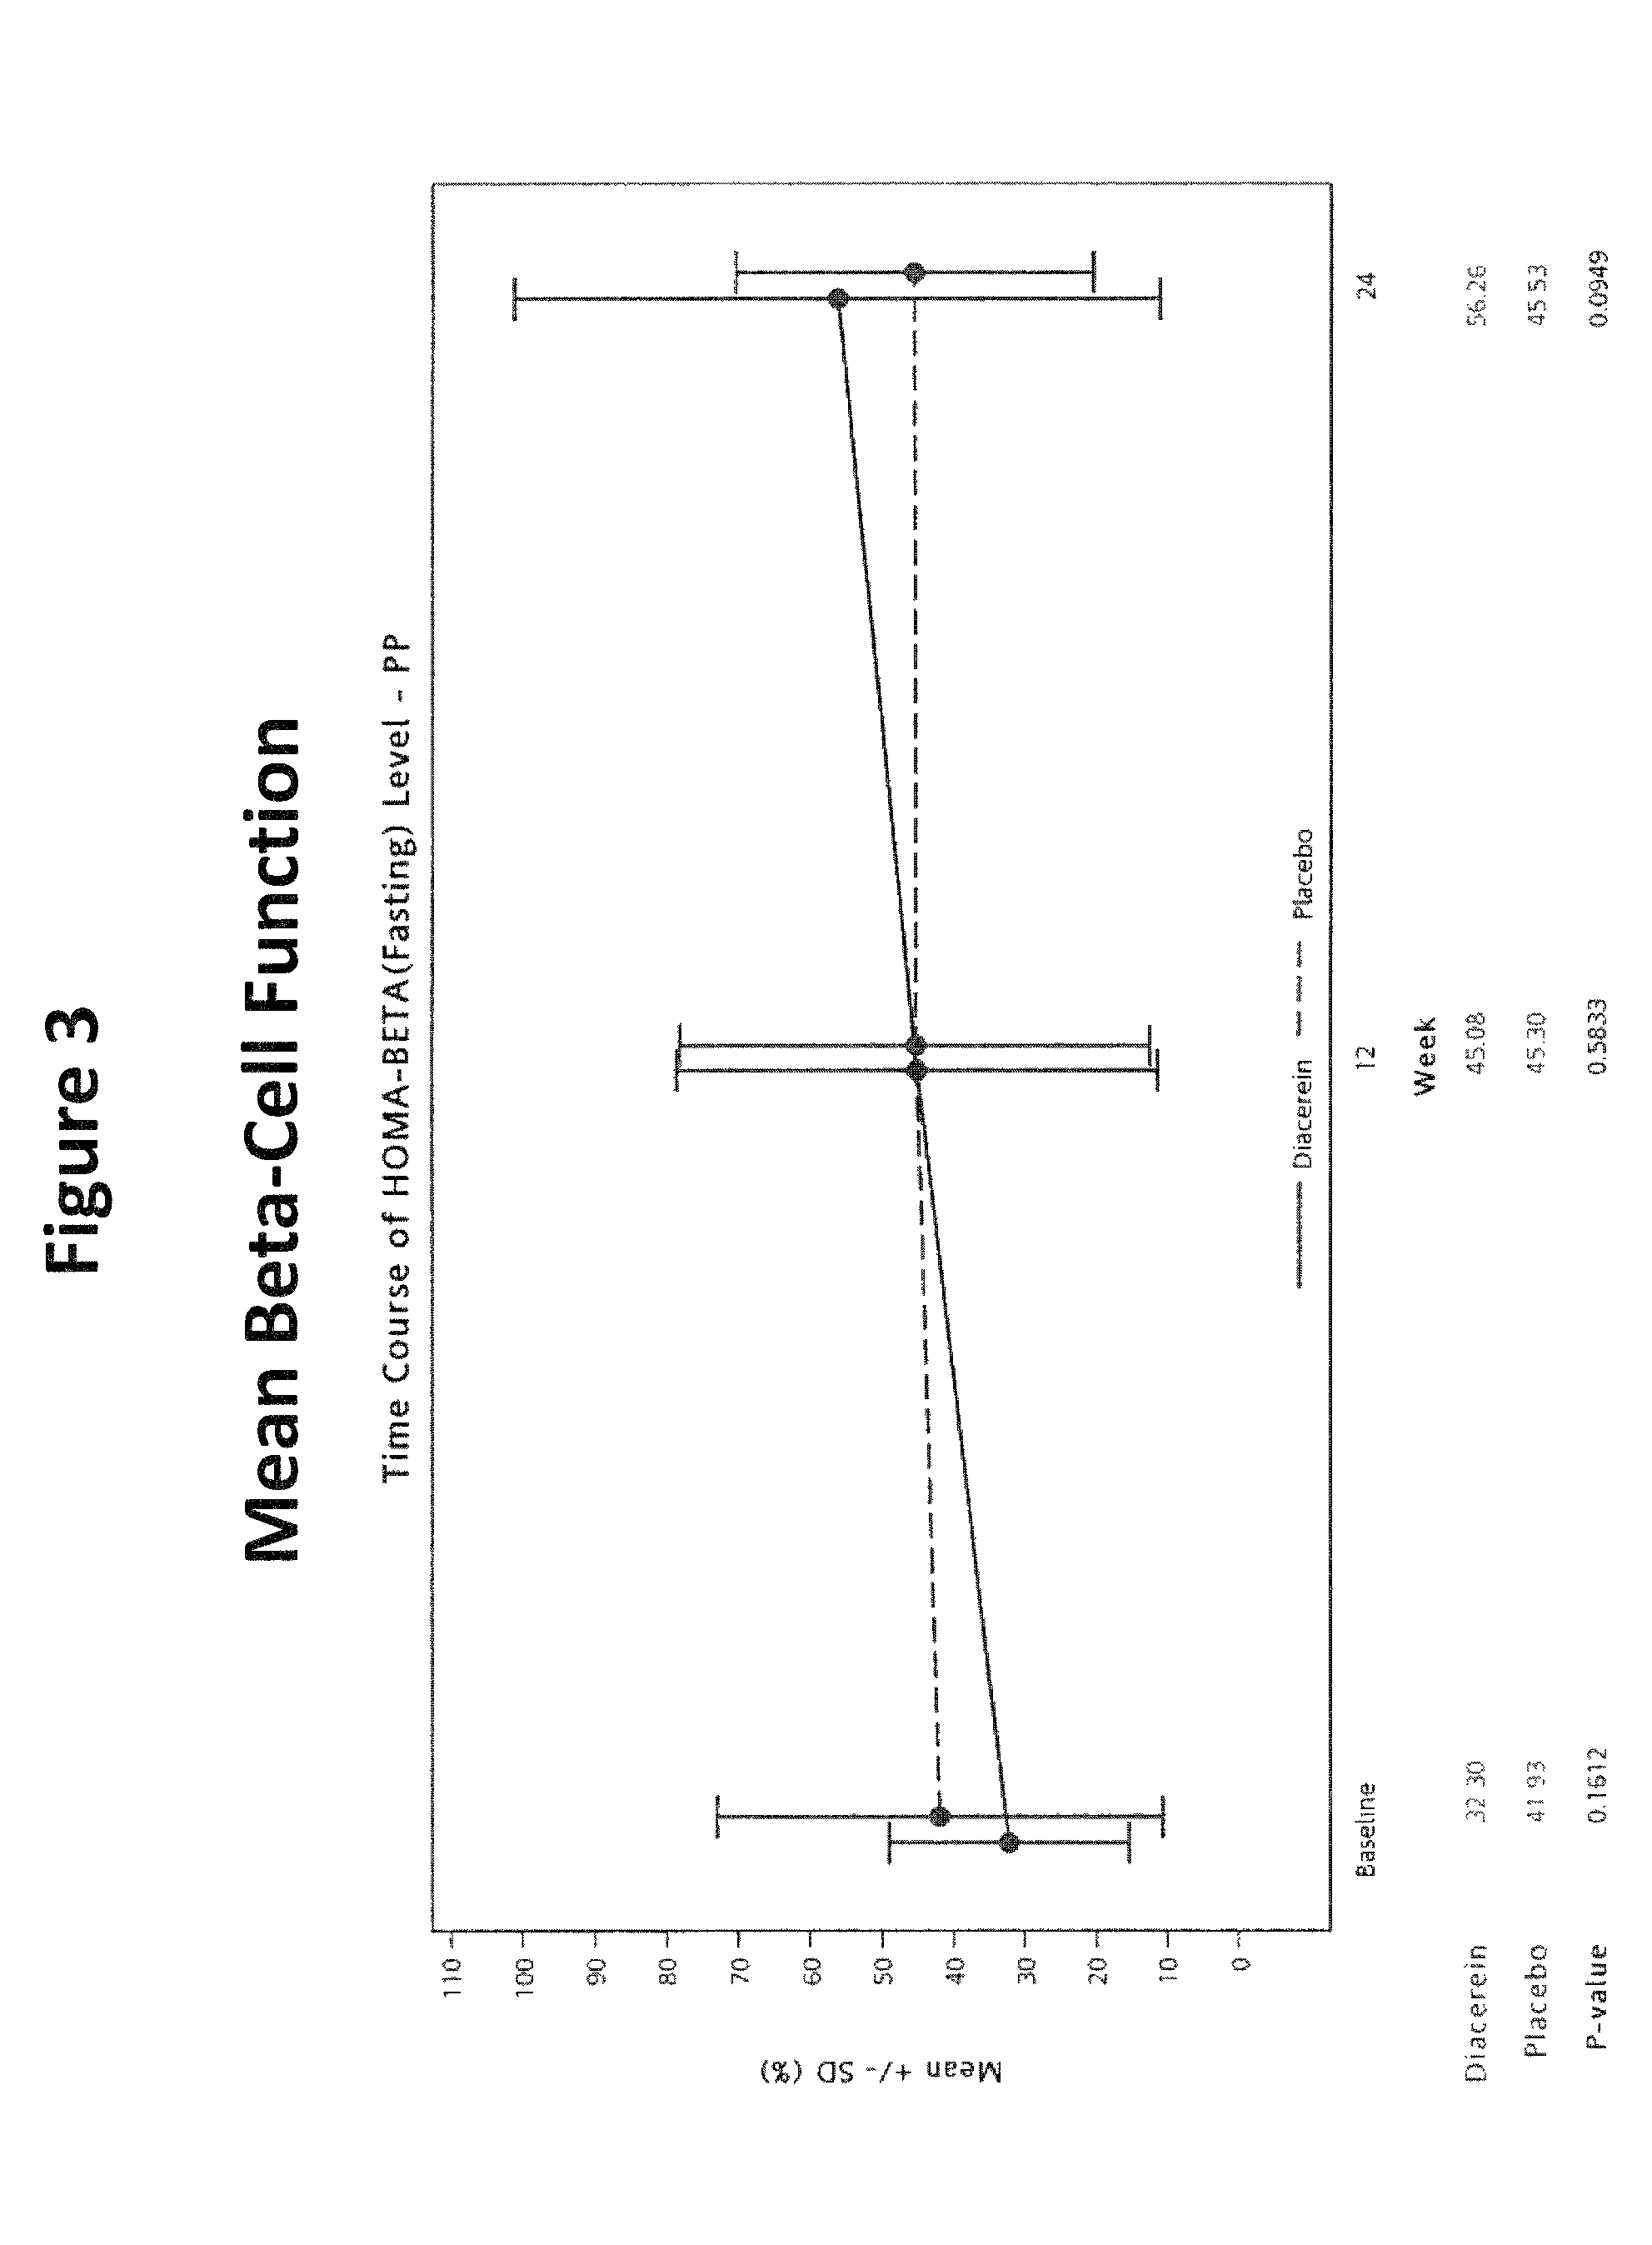 Methods of using diacerein as an adjunctive therapy for diabetes